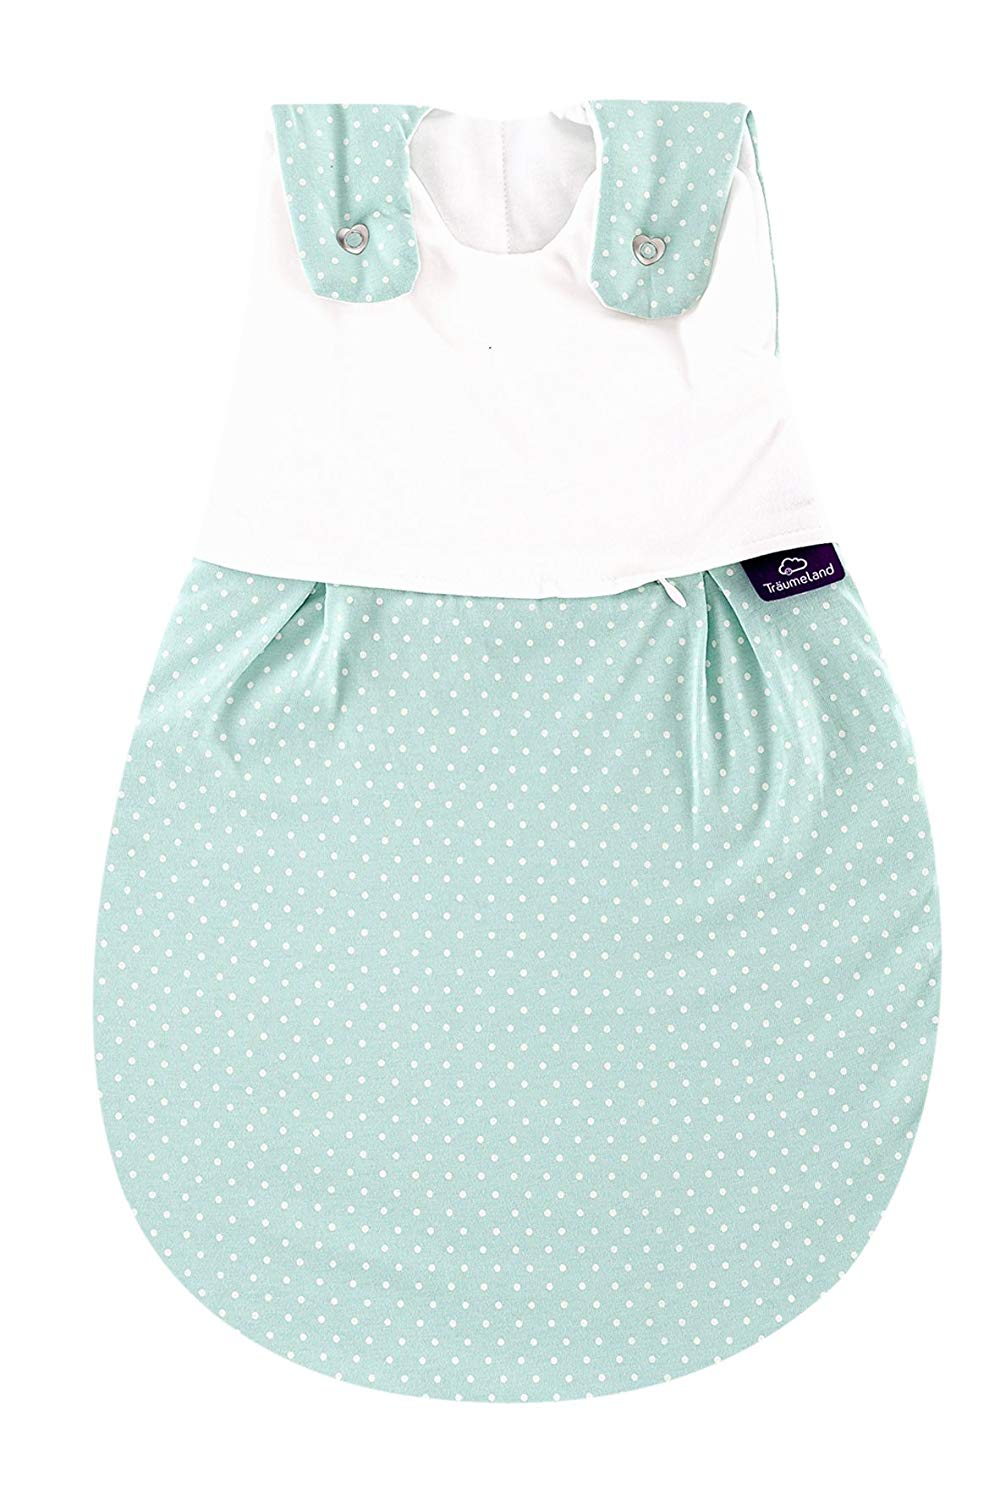 Dreams Country S0100305 Outdoor Sleeping Bag Love Me Mint Dots 9 Months, Mu